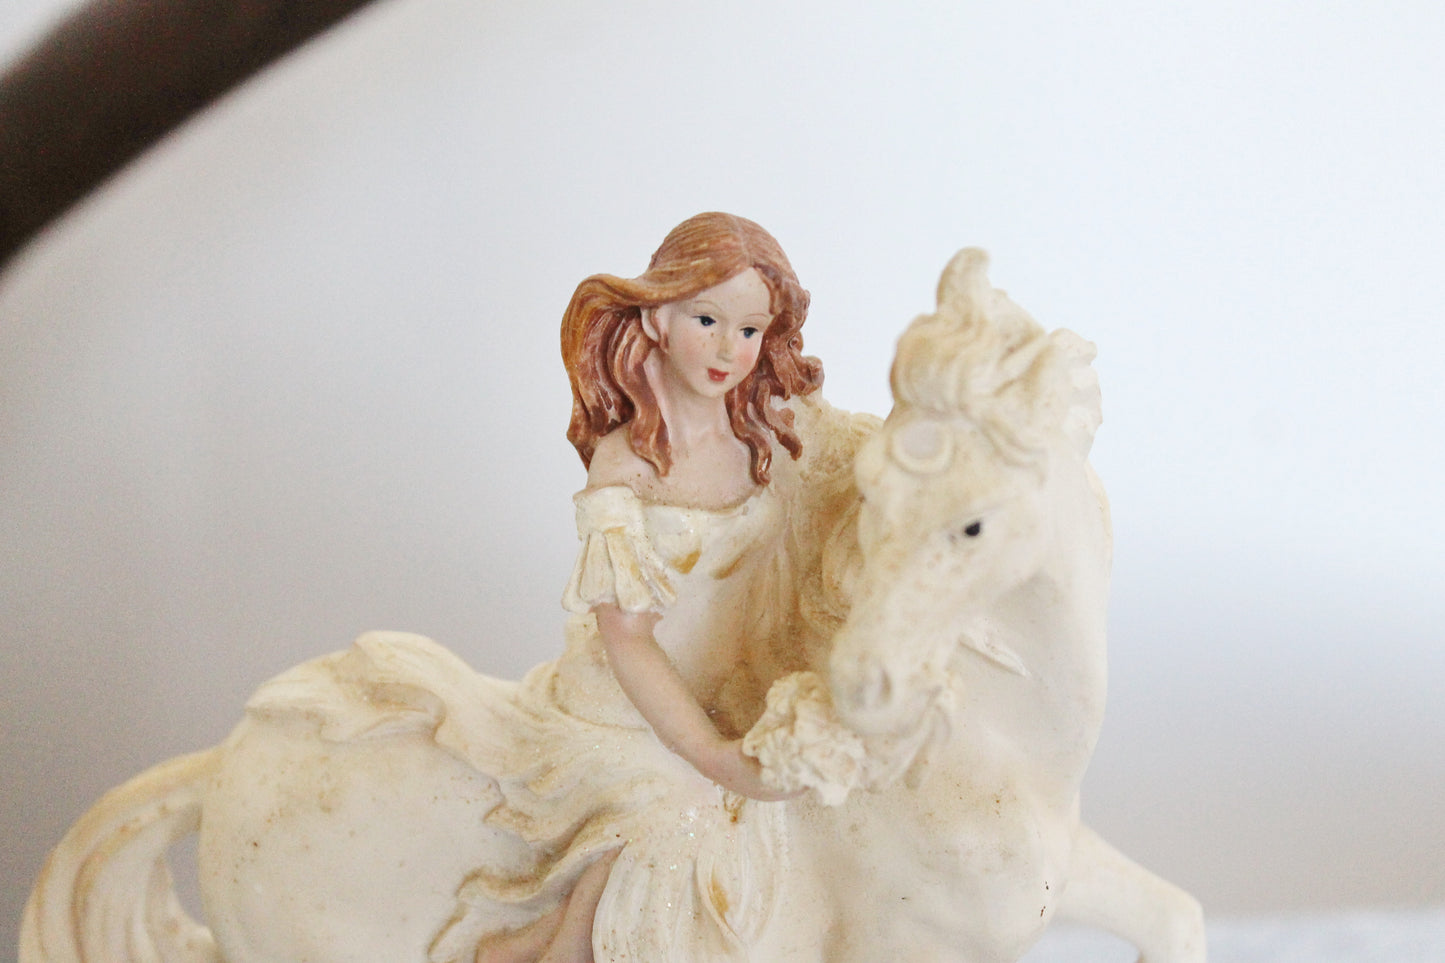 Vintage figurine made of gypsum - A Girl on a horse - 6.7 inches - vintage decor - Germany vintage - later 1980s